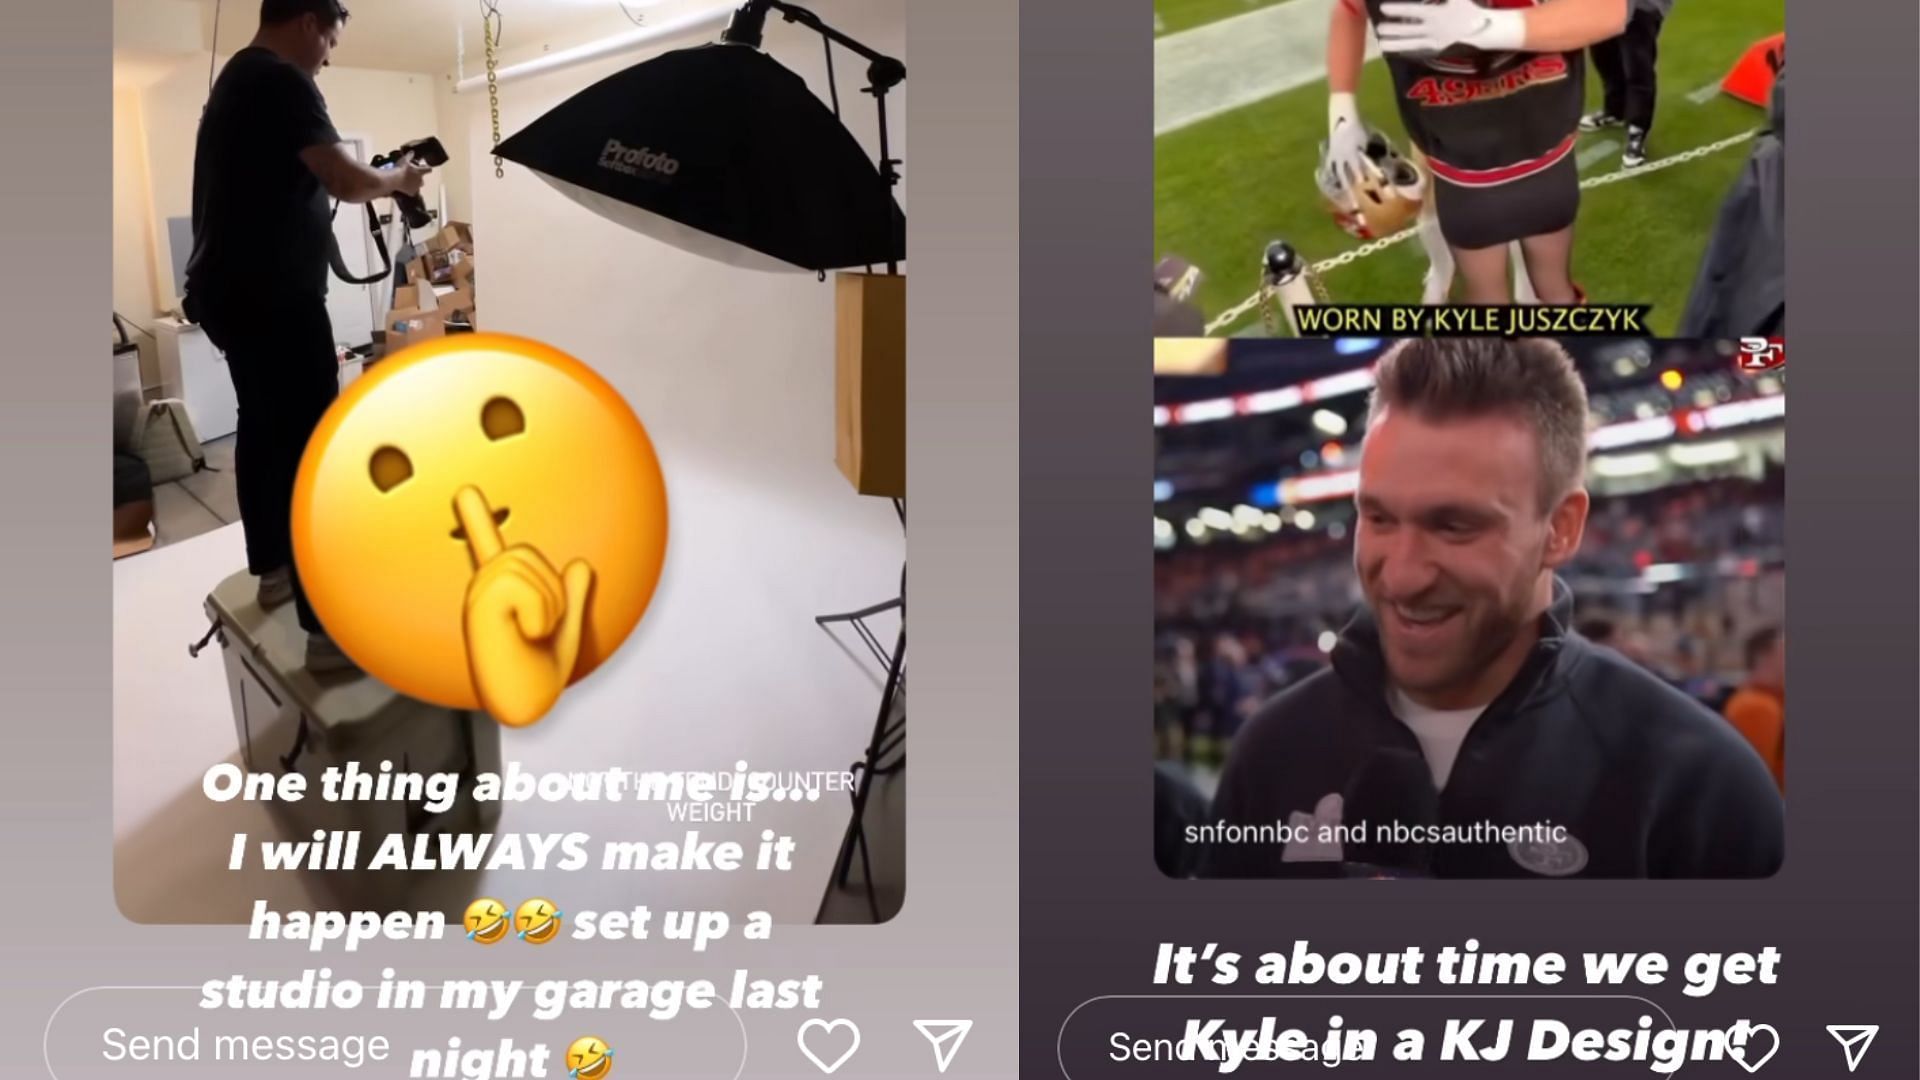 Kristin Juszczyk could be designing a piece for her husband.